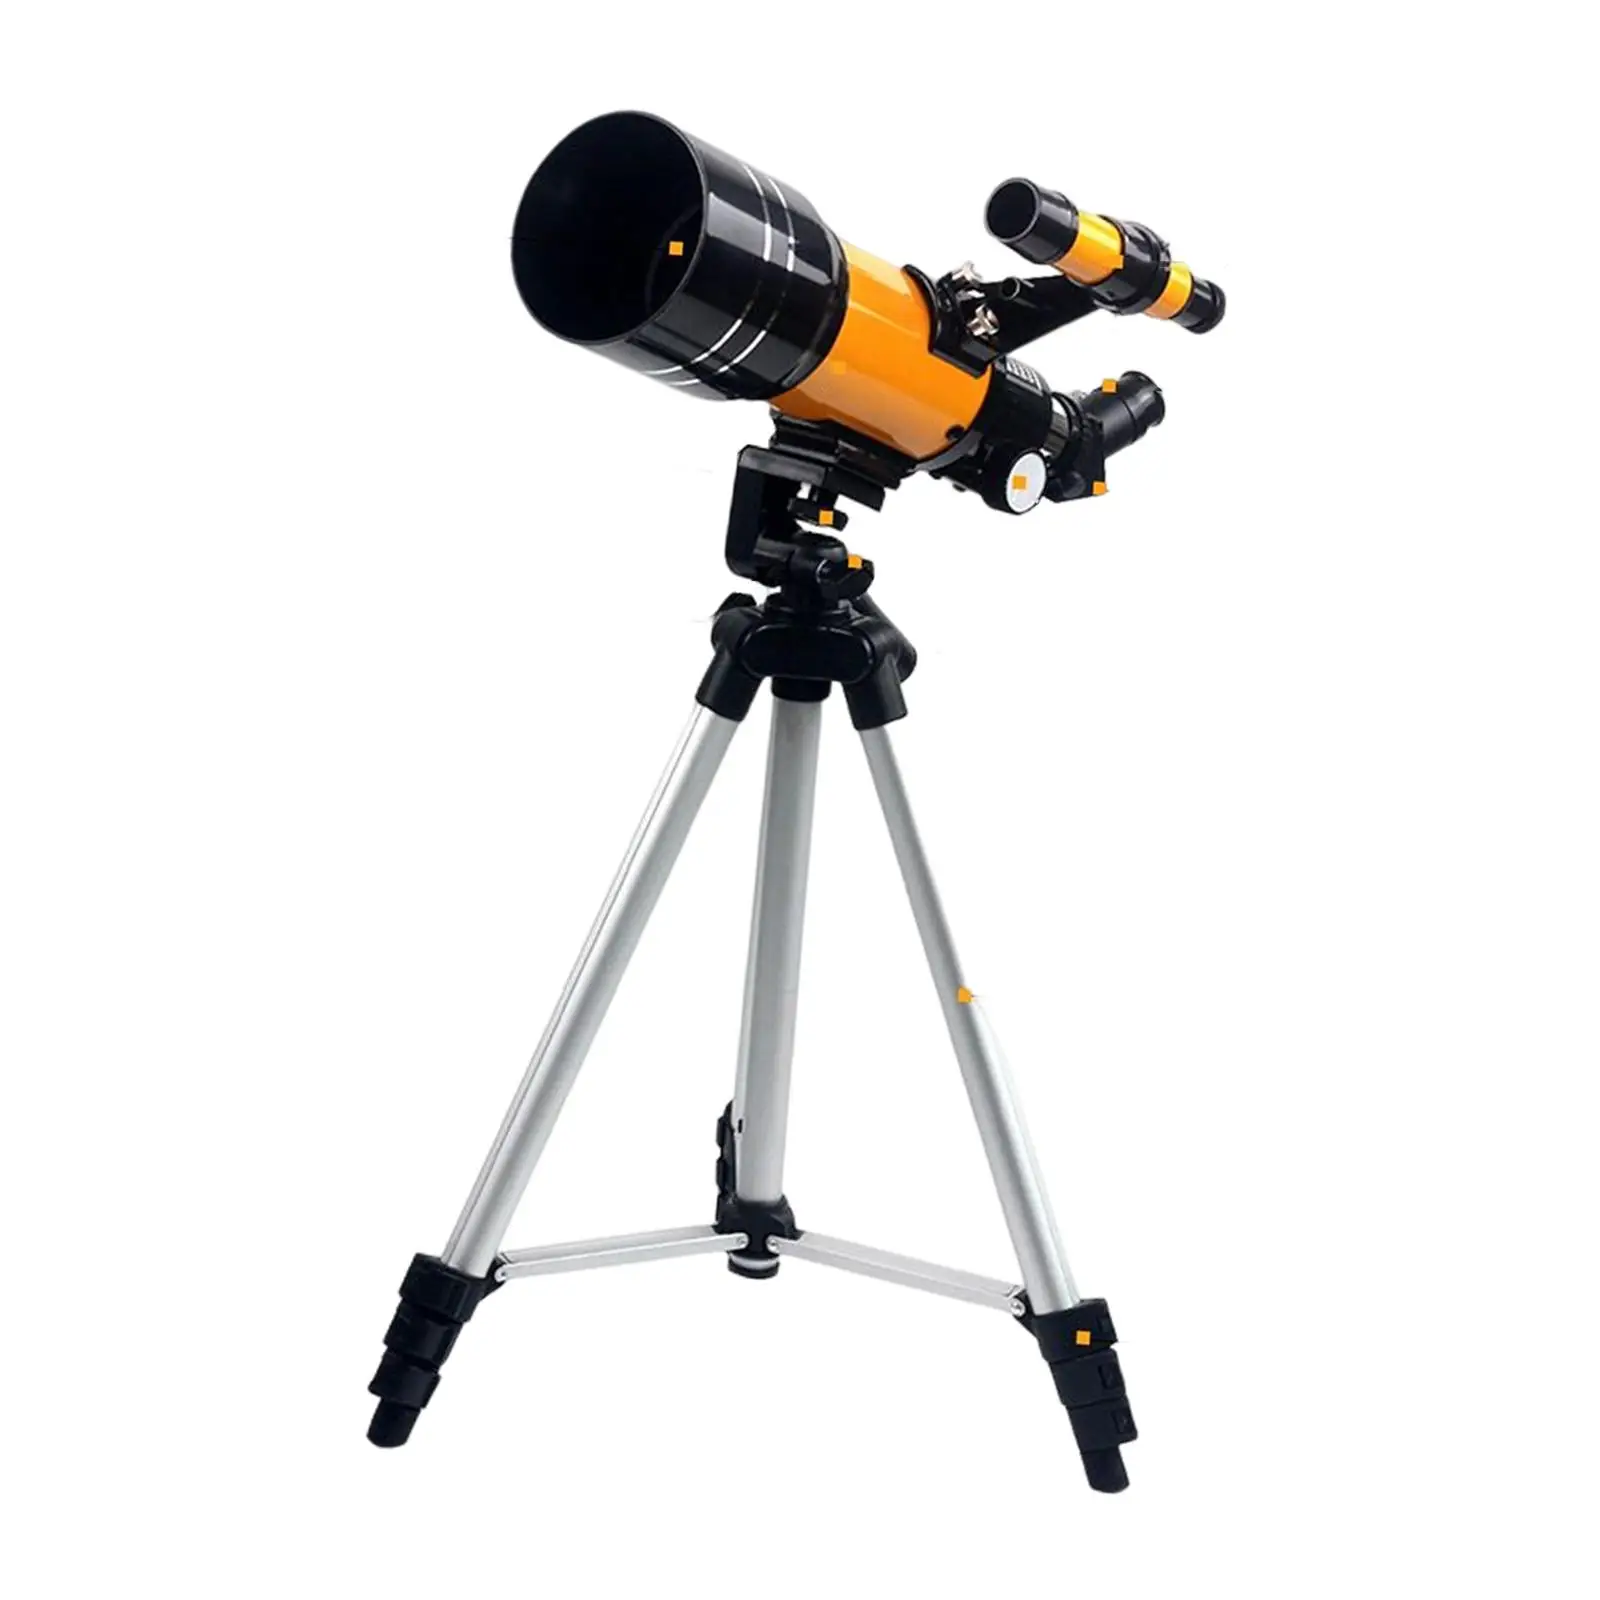 Portable Telescope 70mm apertures 300mm with Tripod Fully Coated 150x Monocular Telescope Refractor Telescope for Kids Beginners